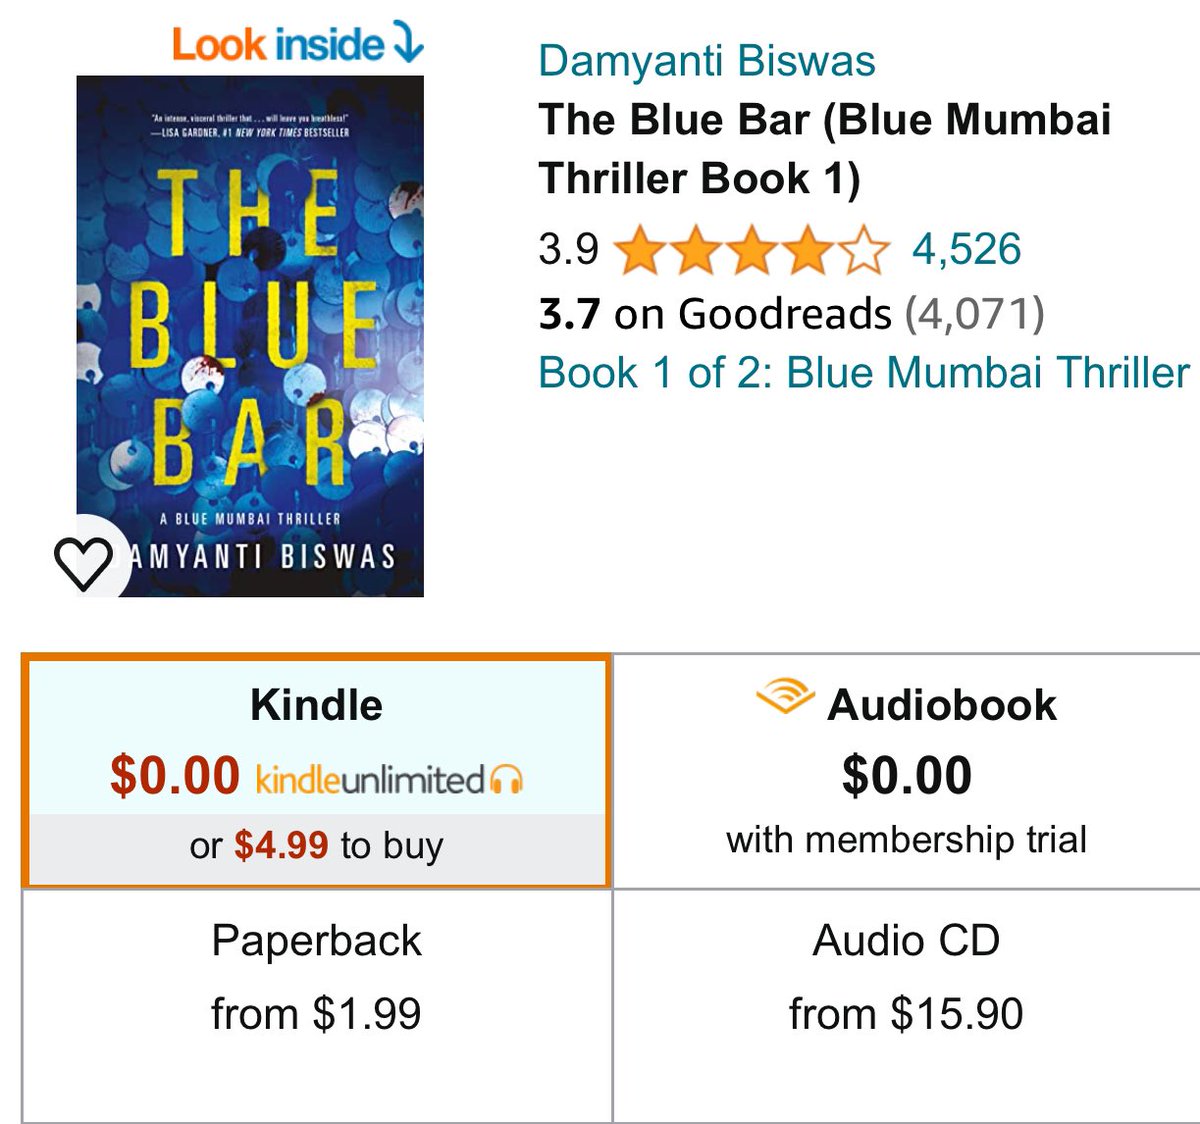 #Booktwt THE BLUE BAR paperback is on 1.99 offer. If you like books by Lisa Gardner, Tana French, Jodi Picoult, Mary Kubica, Ruth Ware, try The Blue Bar. 📘In gritty, glam Mumbai, a police inspector and a bar girl in love are unaware the same predator is watching them both.